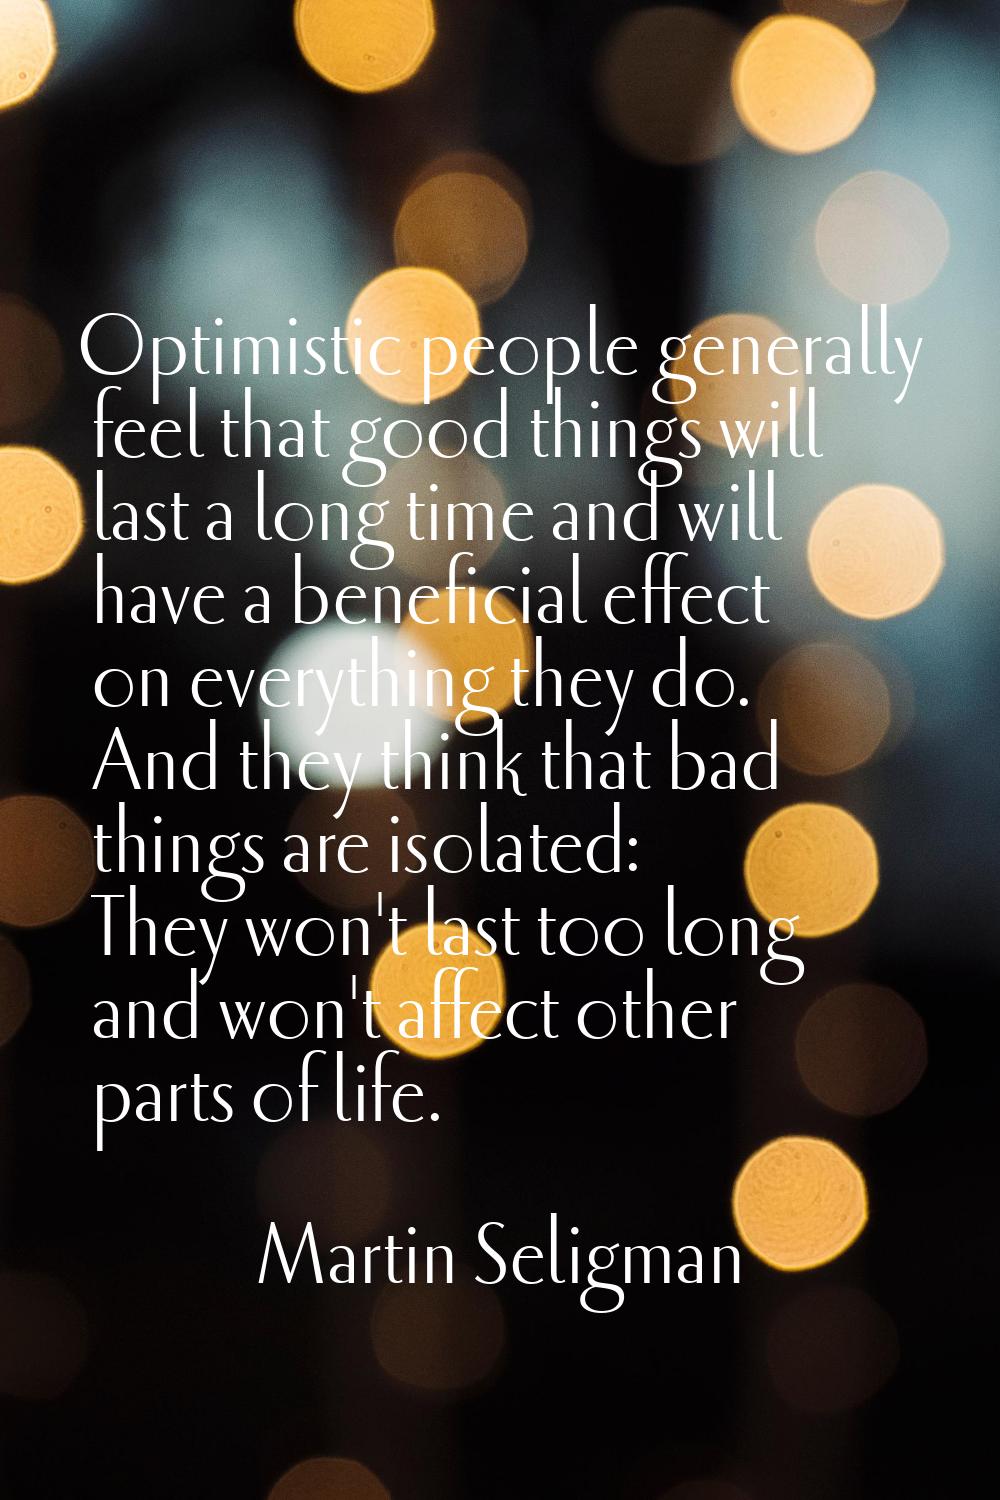 Optimistic people generally feel that good things will last a long time and will have a beneficial 